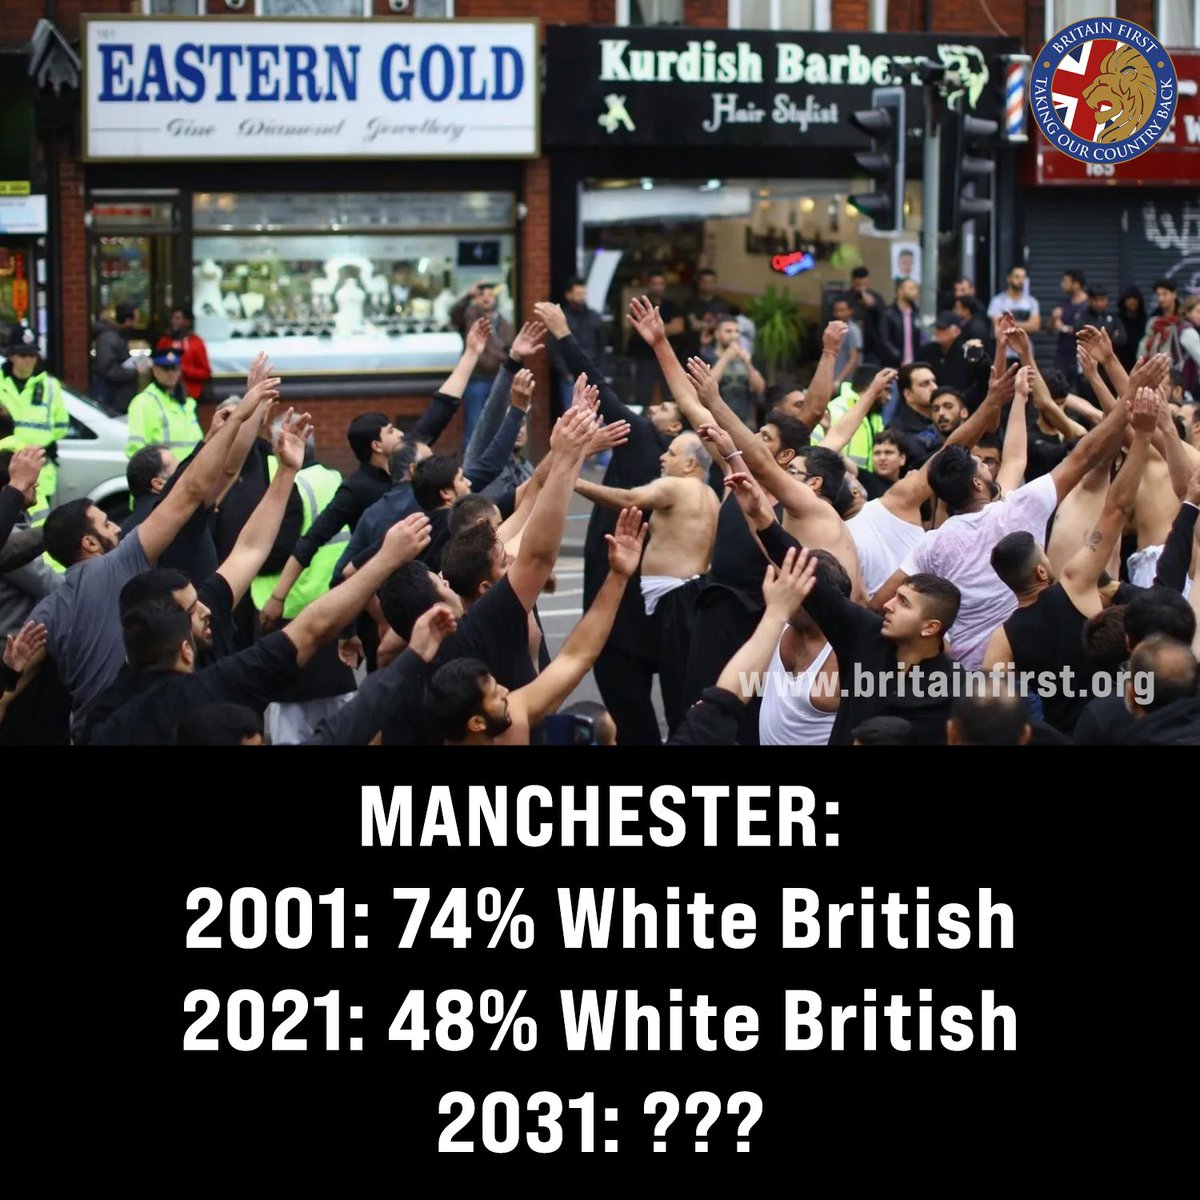 These are real statistics, in just 20 years we became a minority. Can you imagine what our country will look like in another 20 years? It will resemble Islamabad. England has fallen and everyone that sits on their hands just complaining is to blame, don’t like how your future is